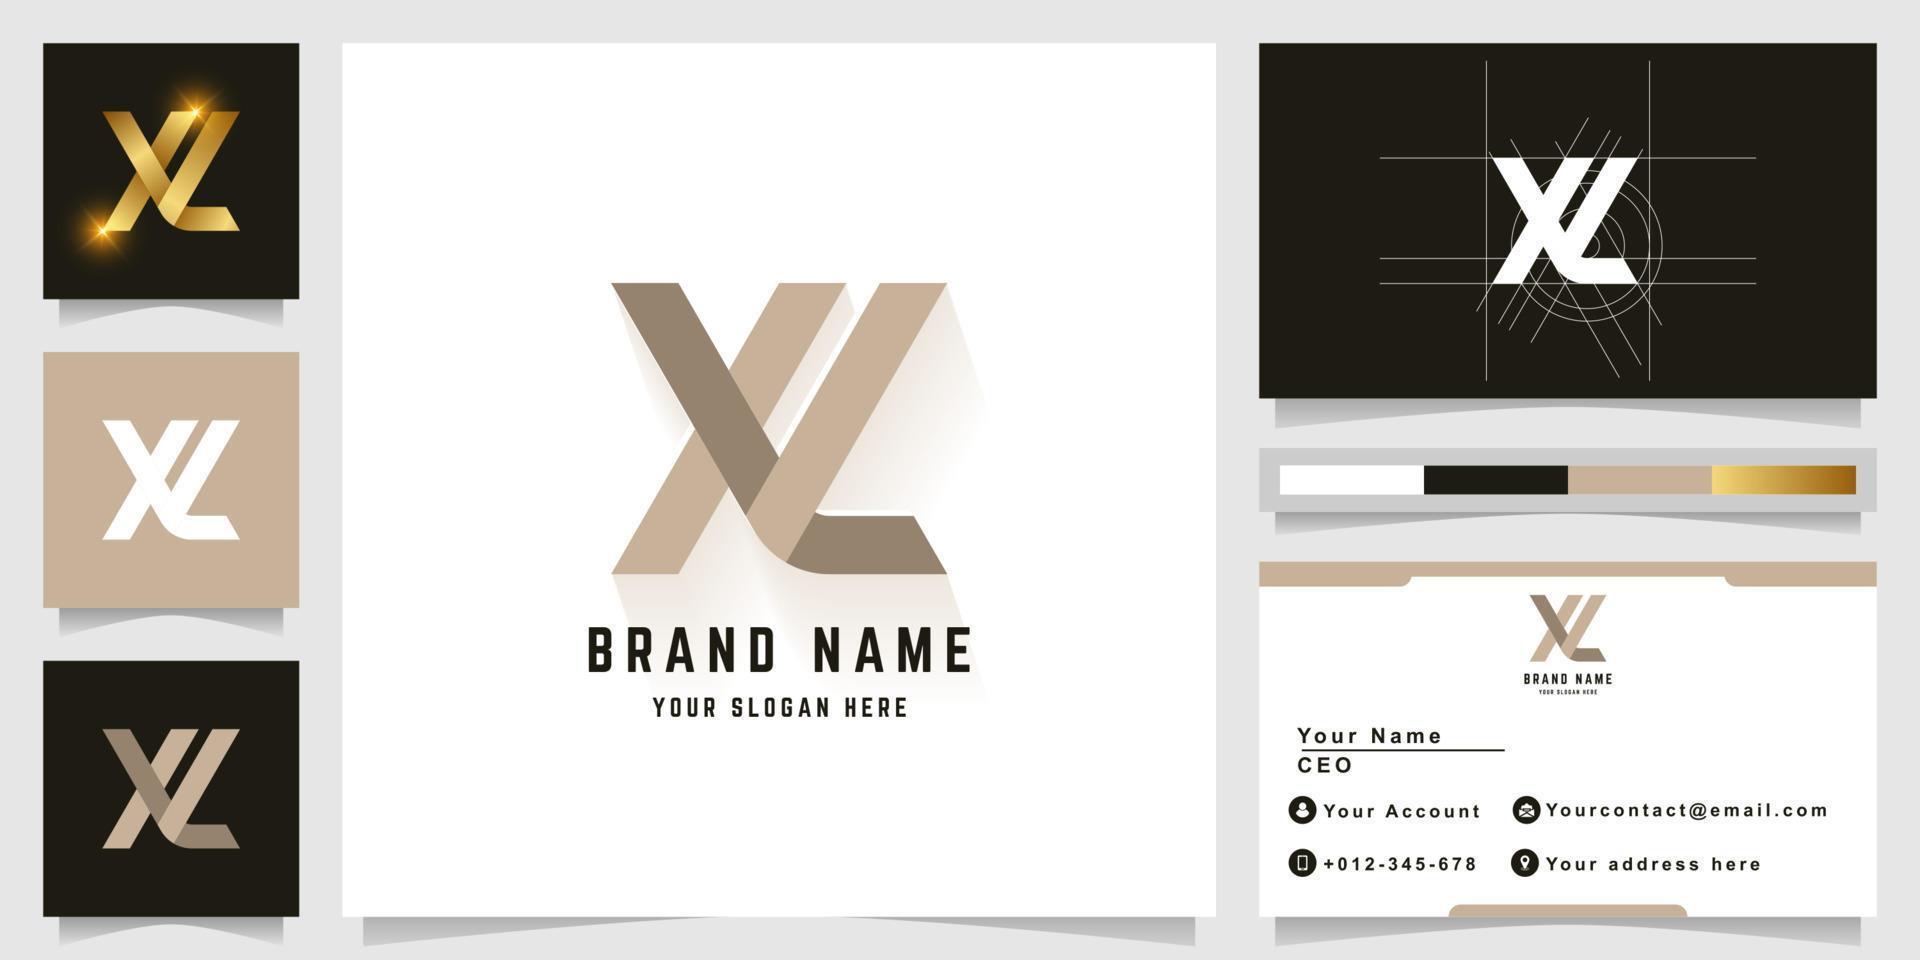 Letter XL or YL monogram logo with business card design vector